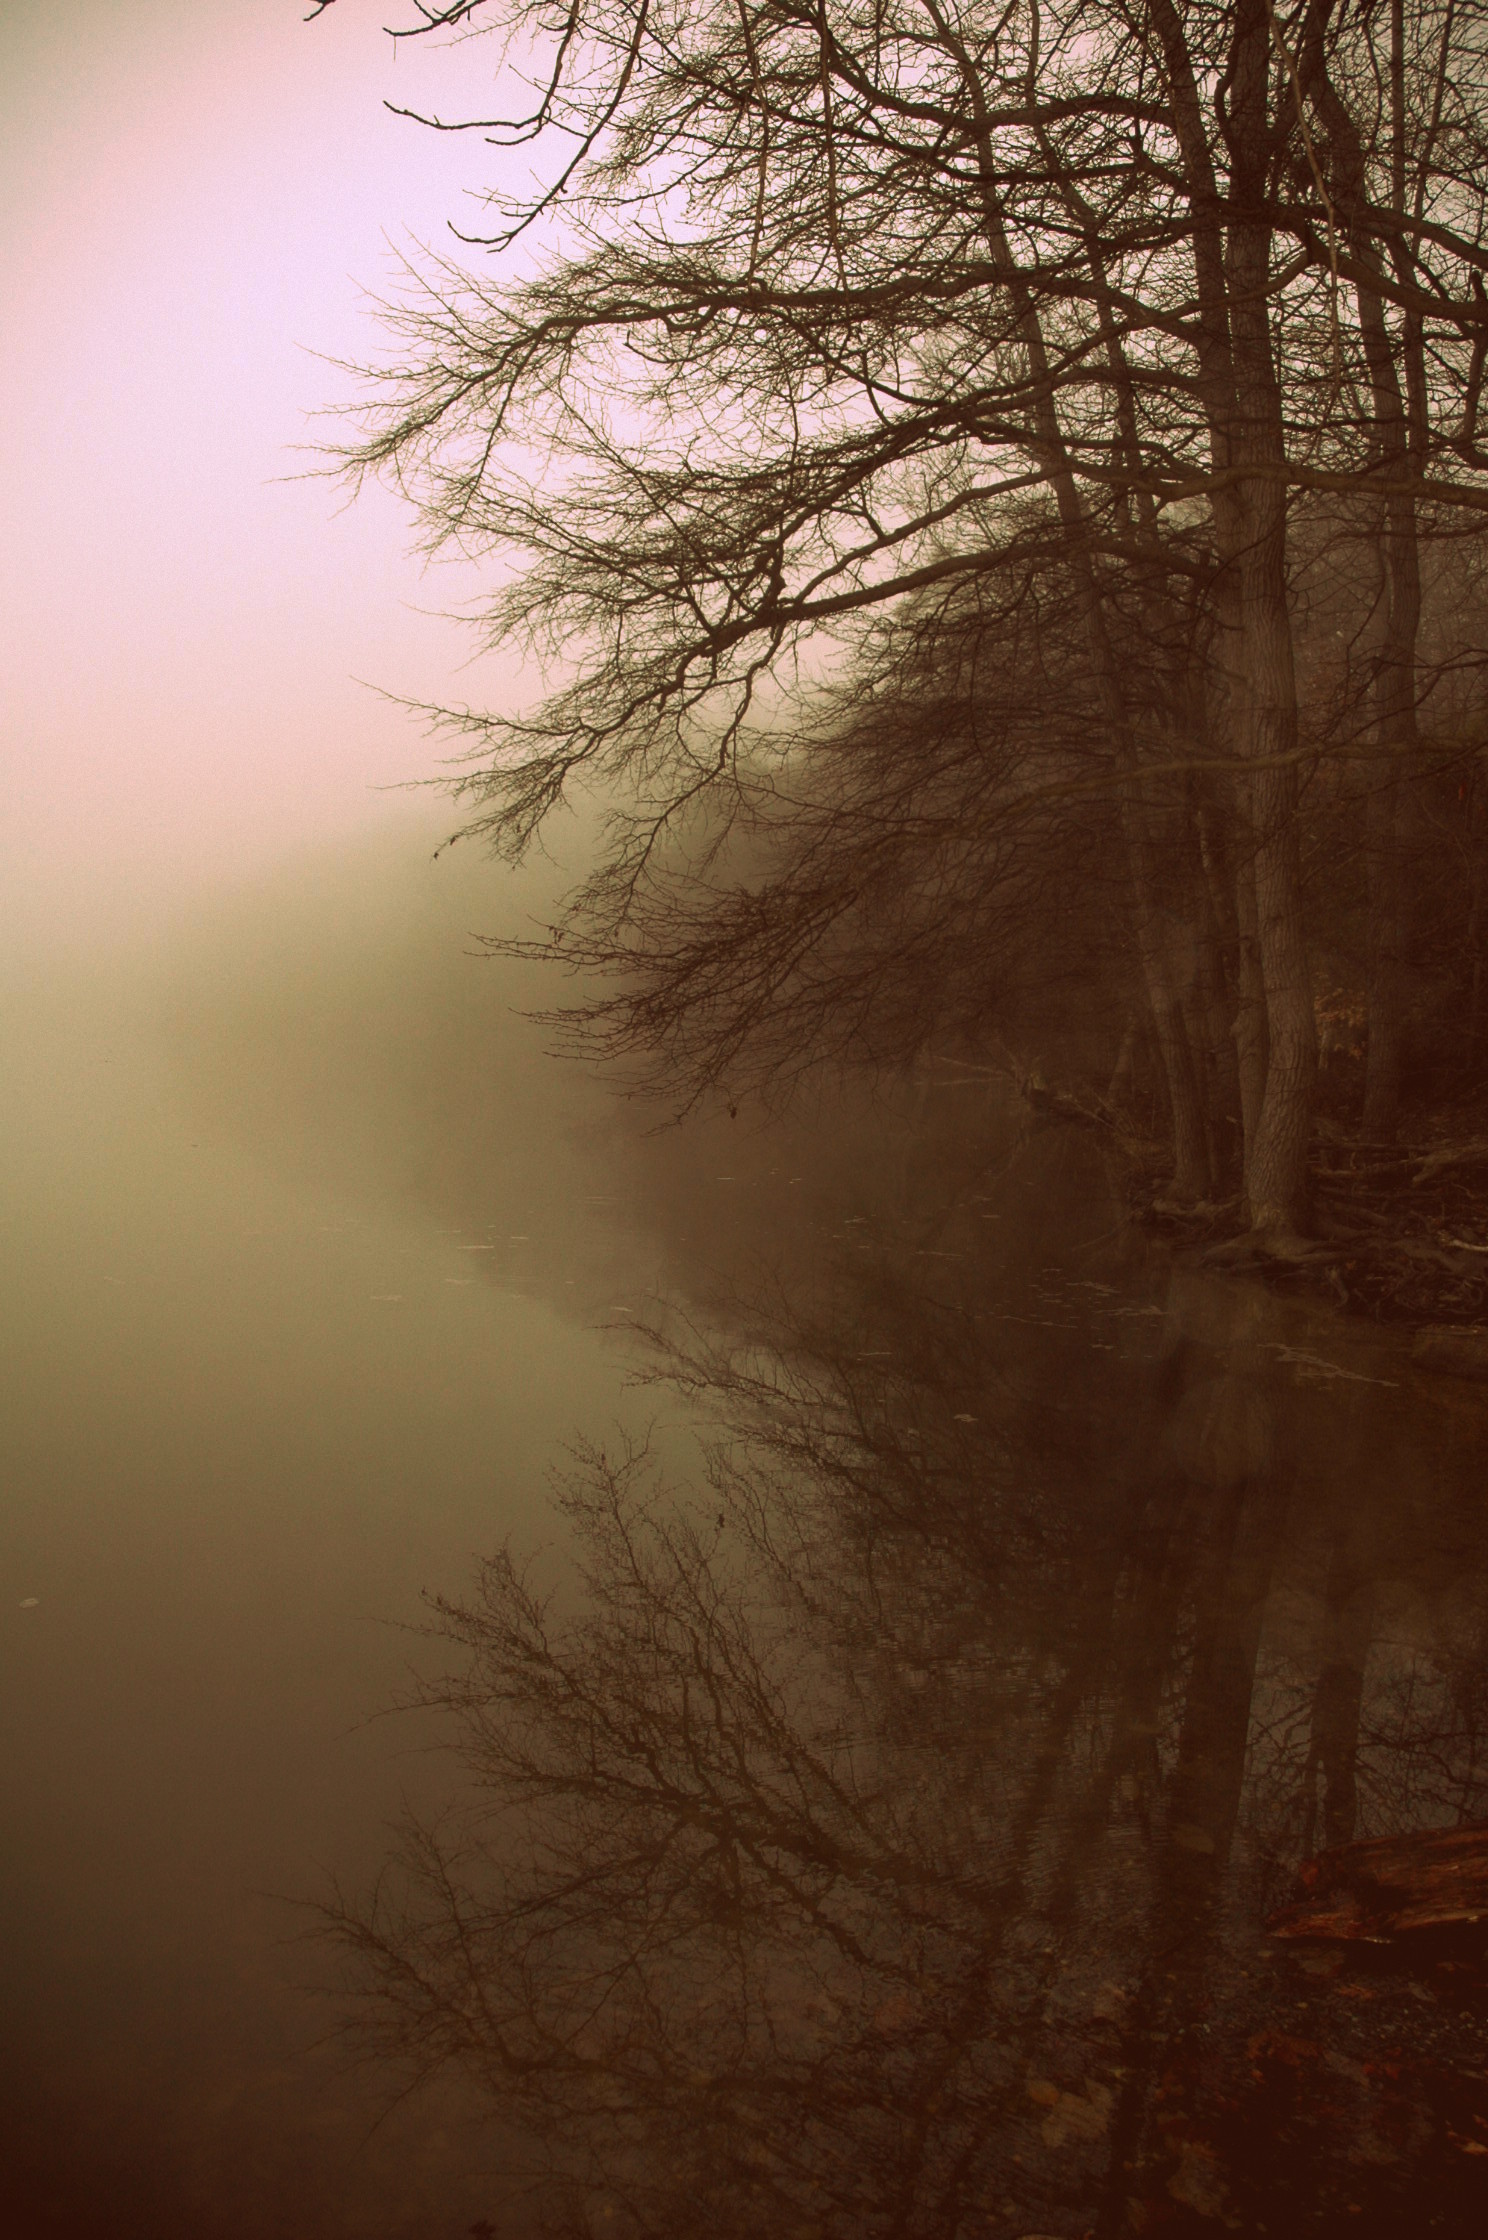 misty day with reflections in the water and trees